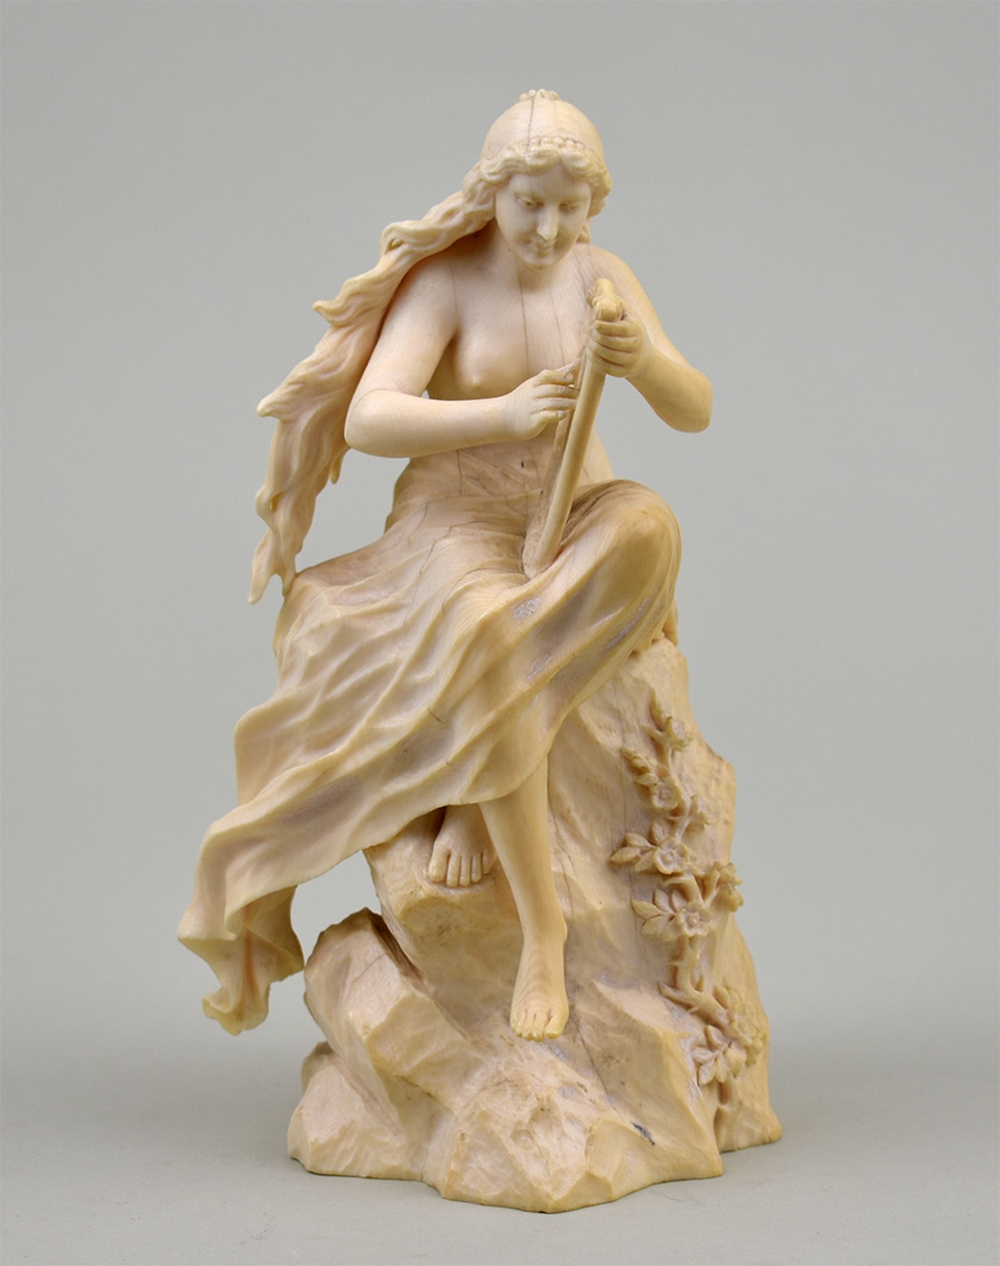 CONTENTIAL IVORY FIGURE OF A CLASSICAL 354910